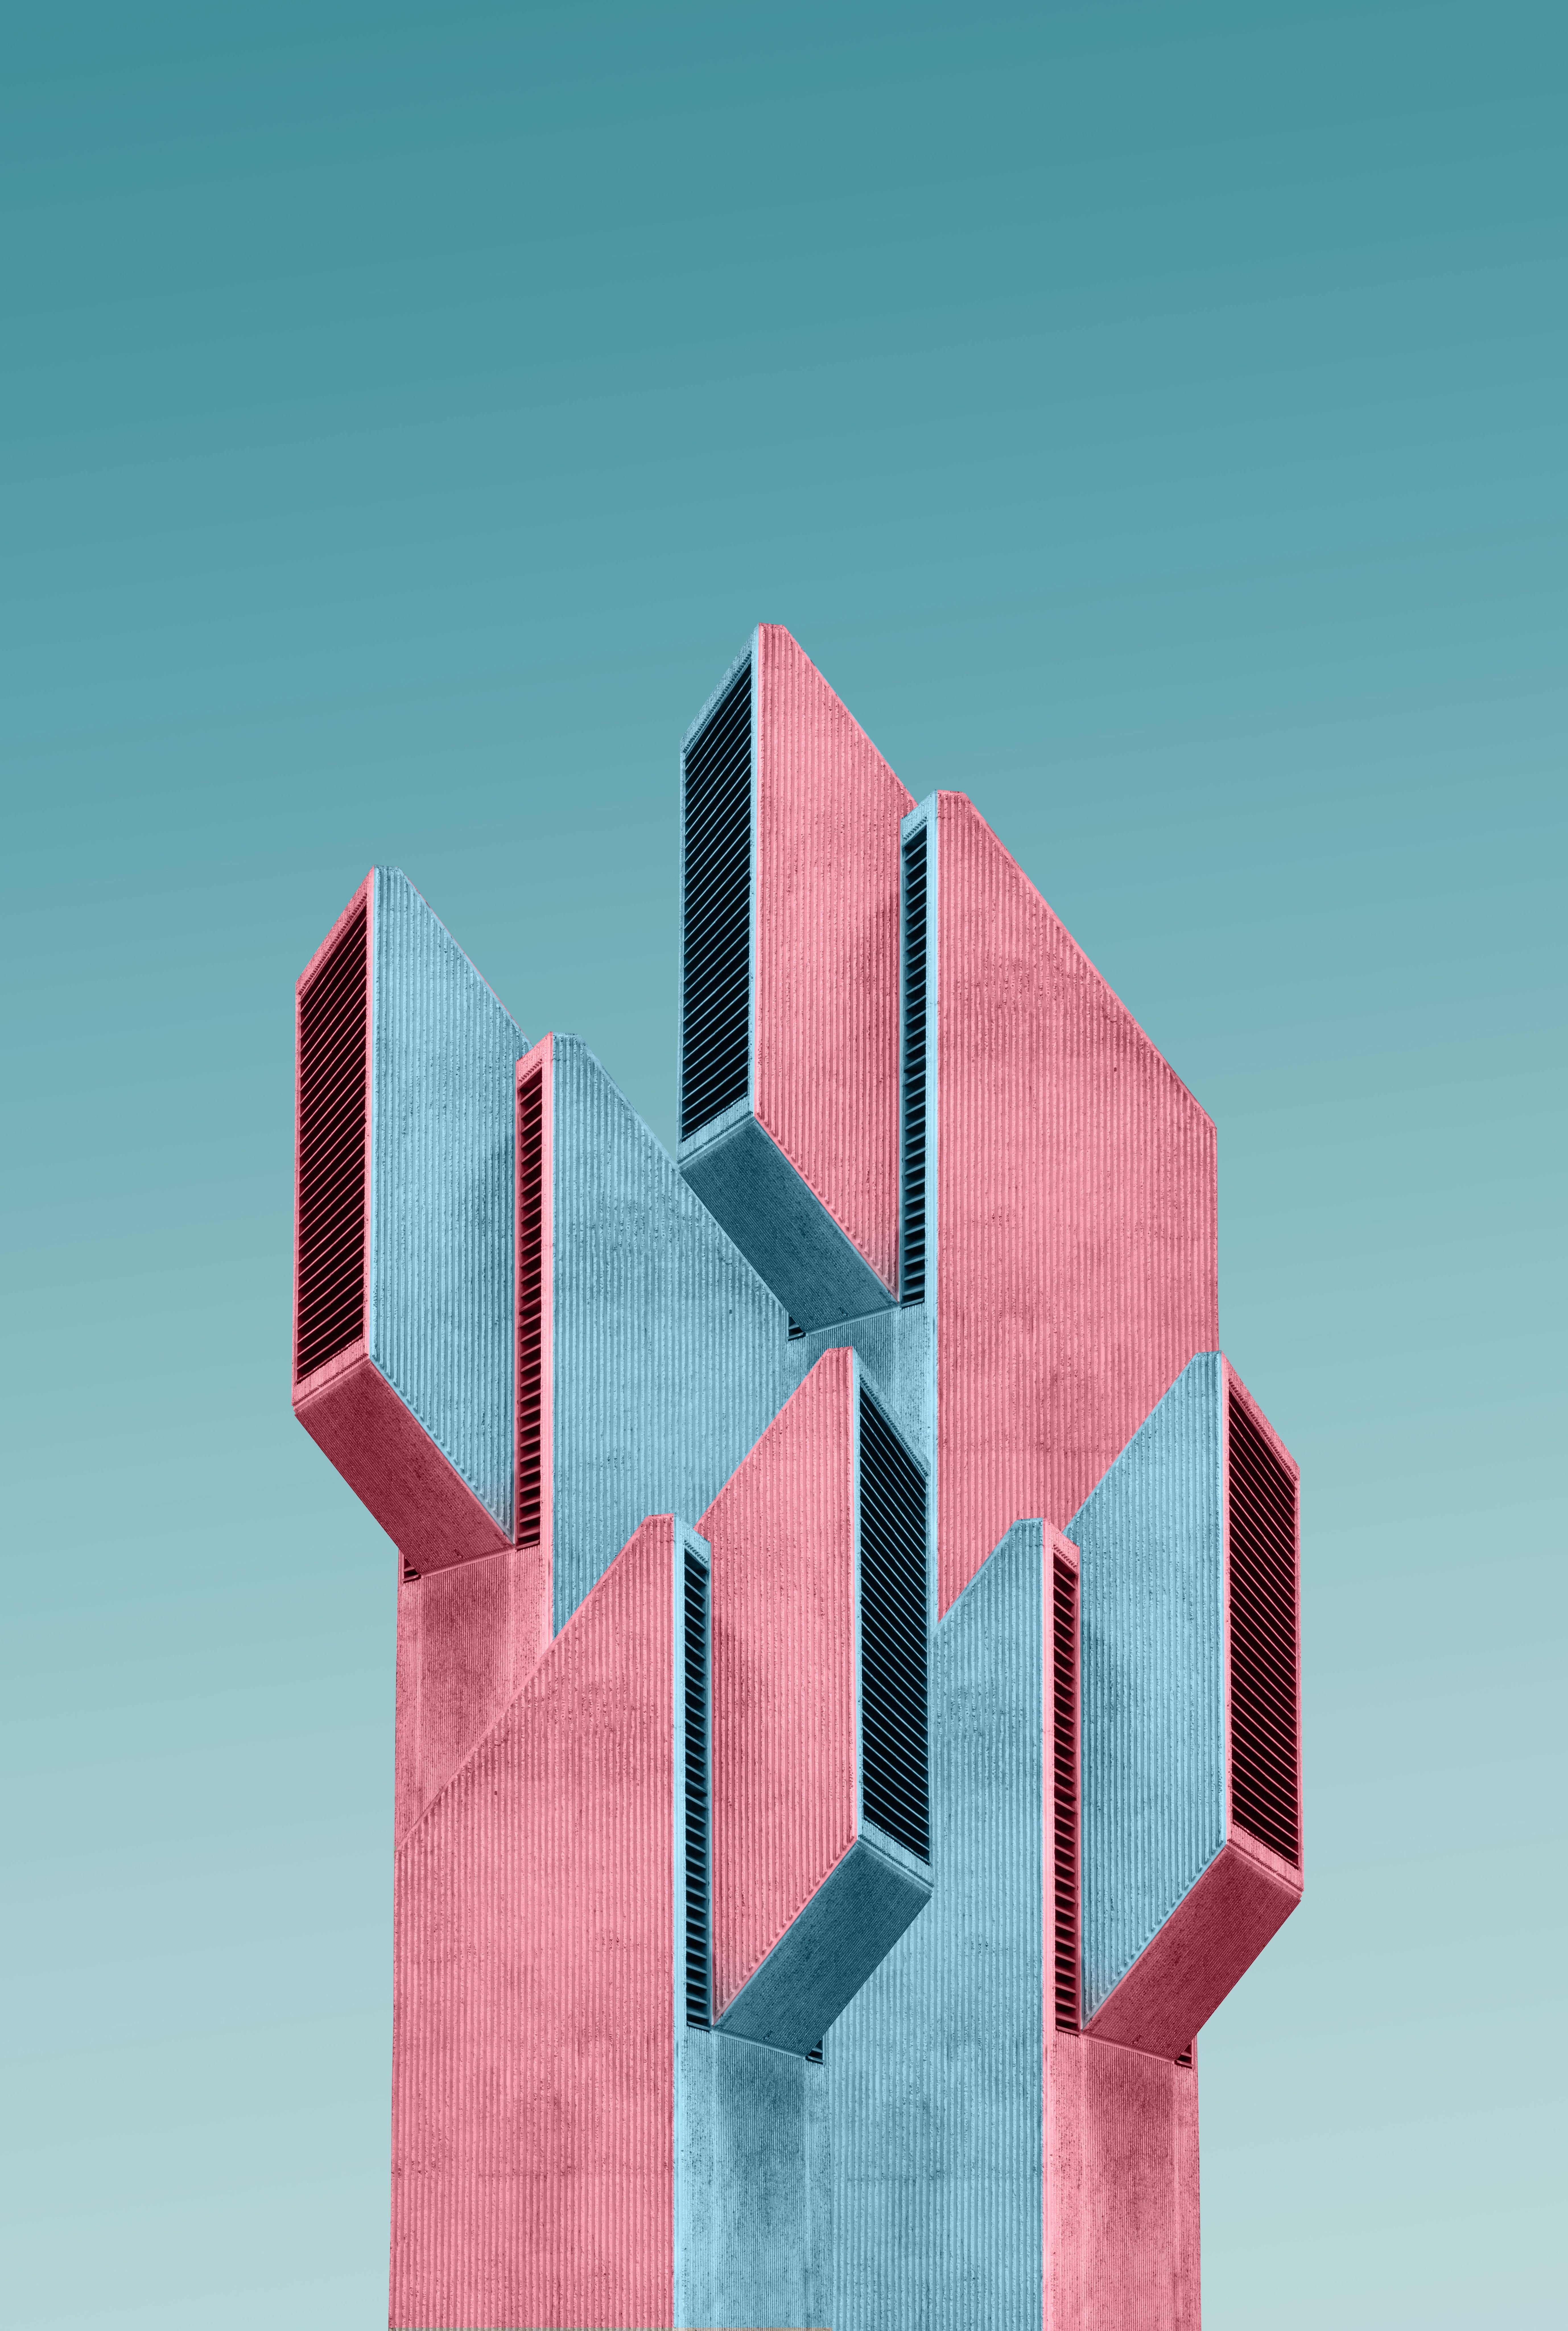 Days of Awesome Wallpaper: Geometric and Architectural